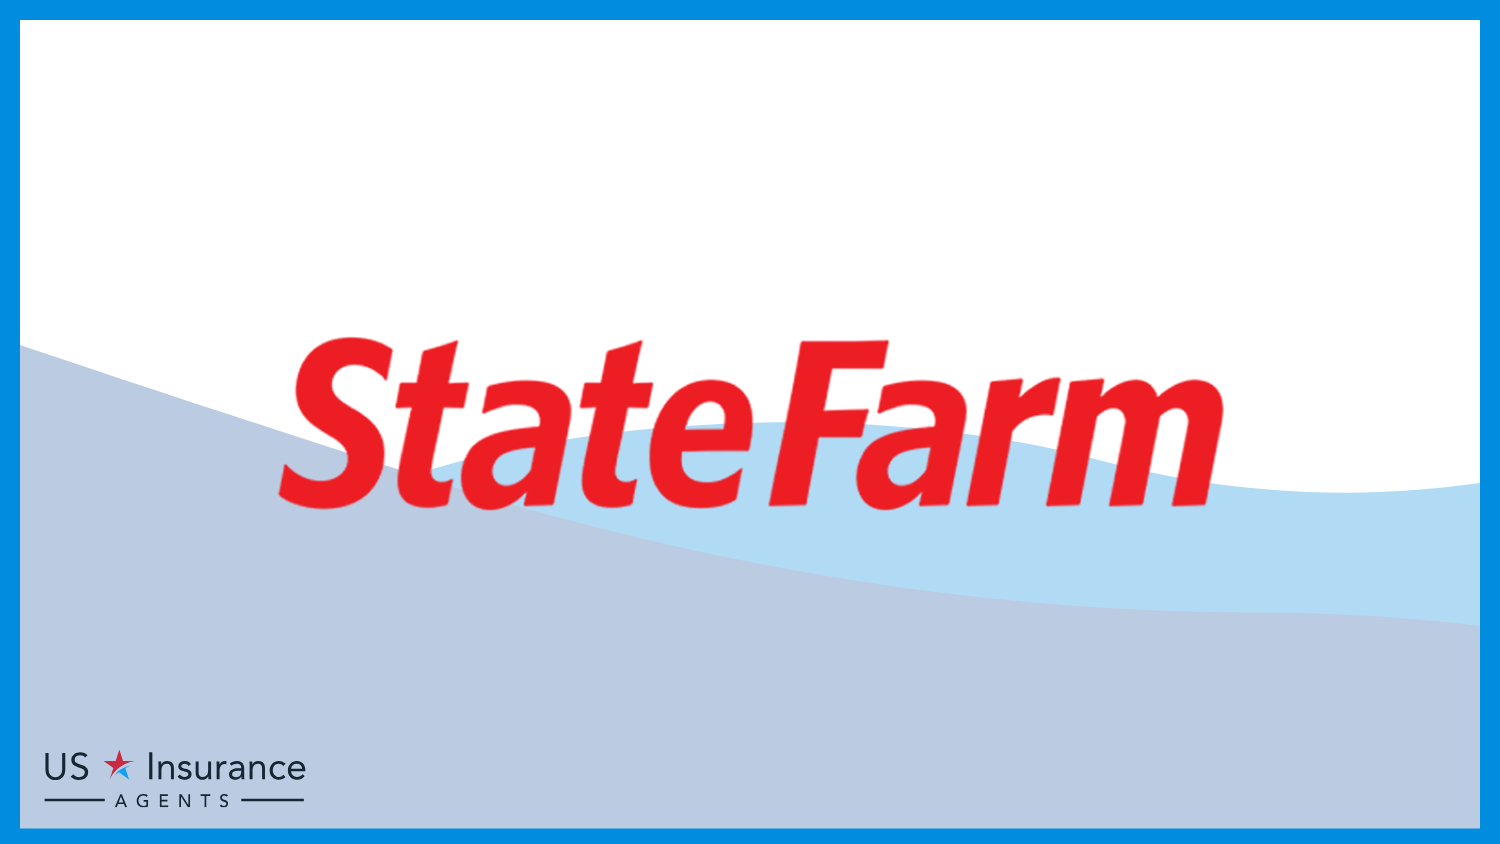 State Farm: Best Business Insurance for Hotels